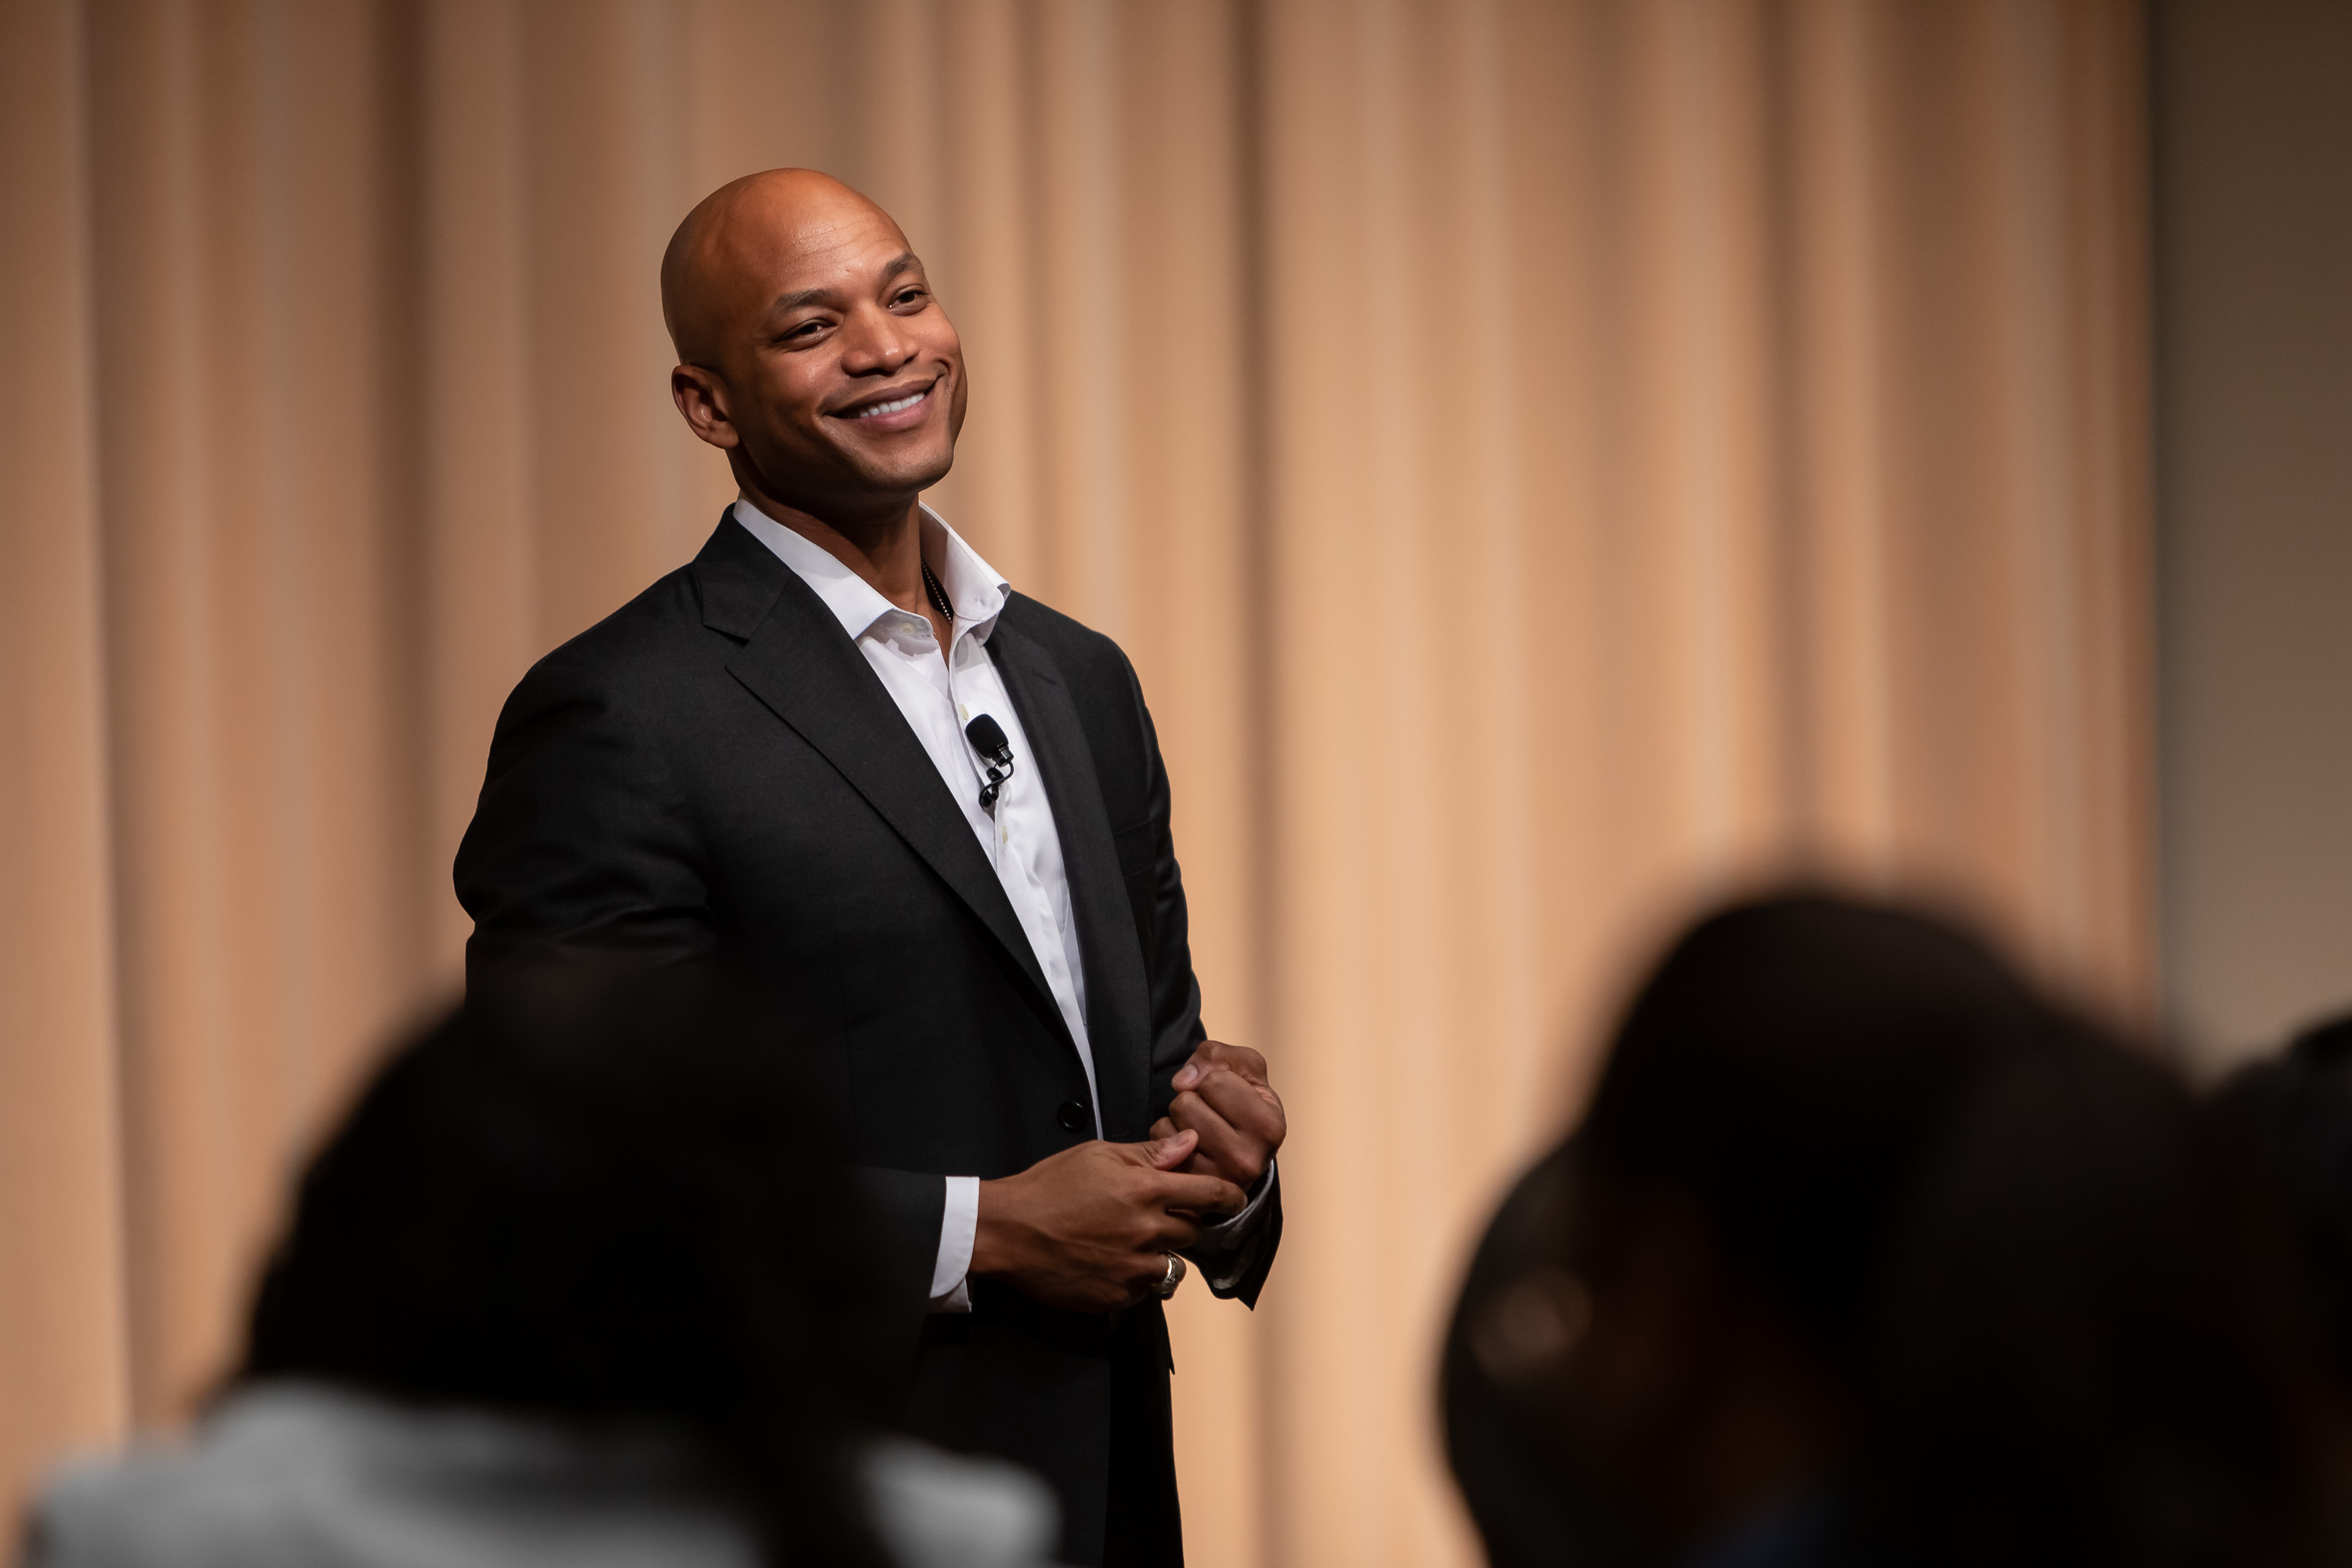 Wes Moore, best-selling author, Army veteran, social entrepreneur and CEO of Robin Hood, one of the largest anti-poverty organizations in the country, delivers his keynote address. (DePaul University/Jeff Carrion)